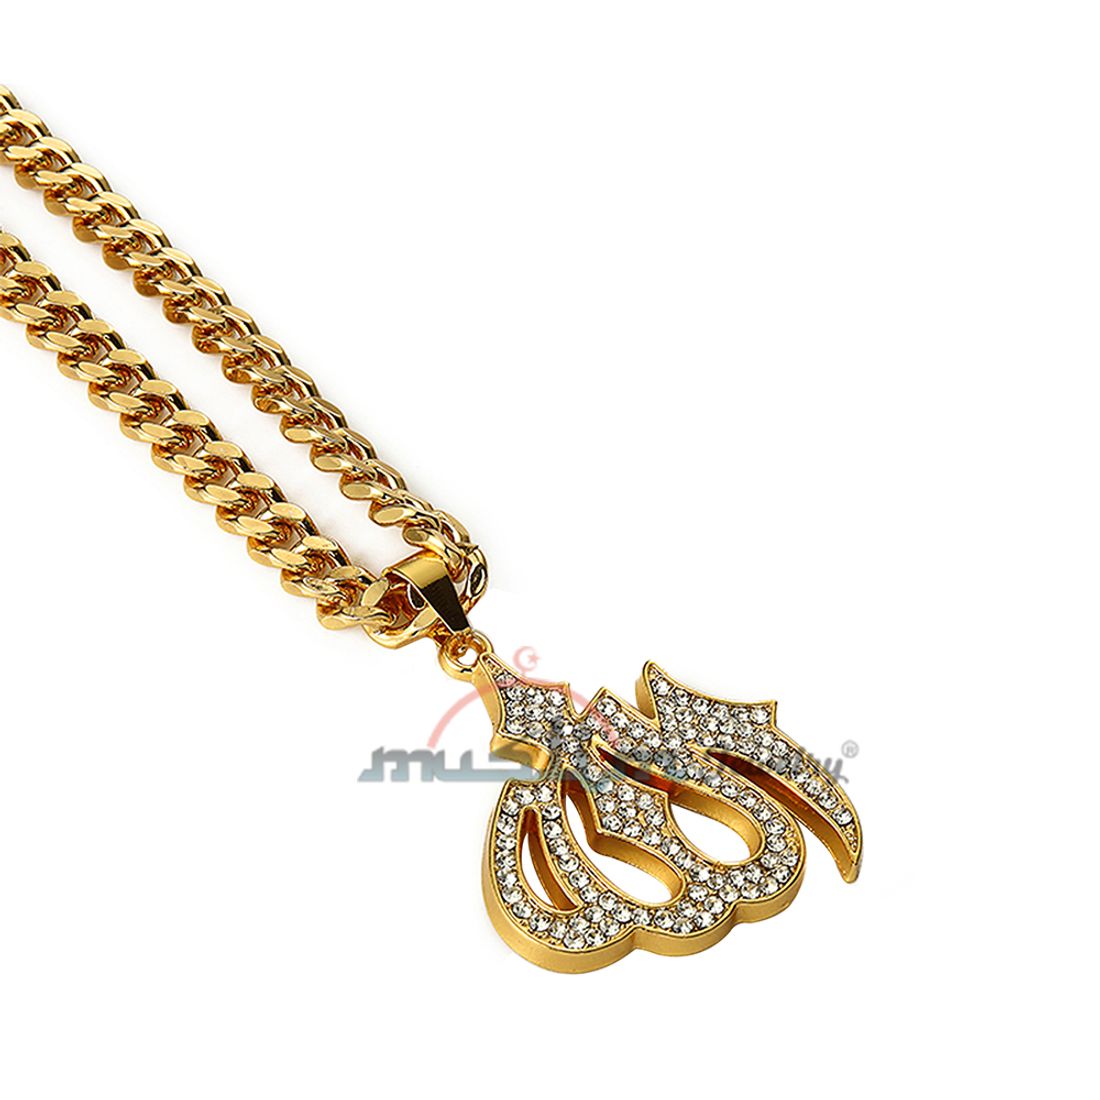 Large Gold Tone Allah Pendant With Rhinestones with Chain